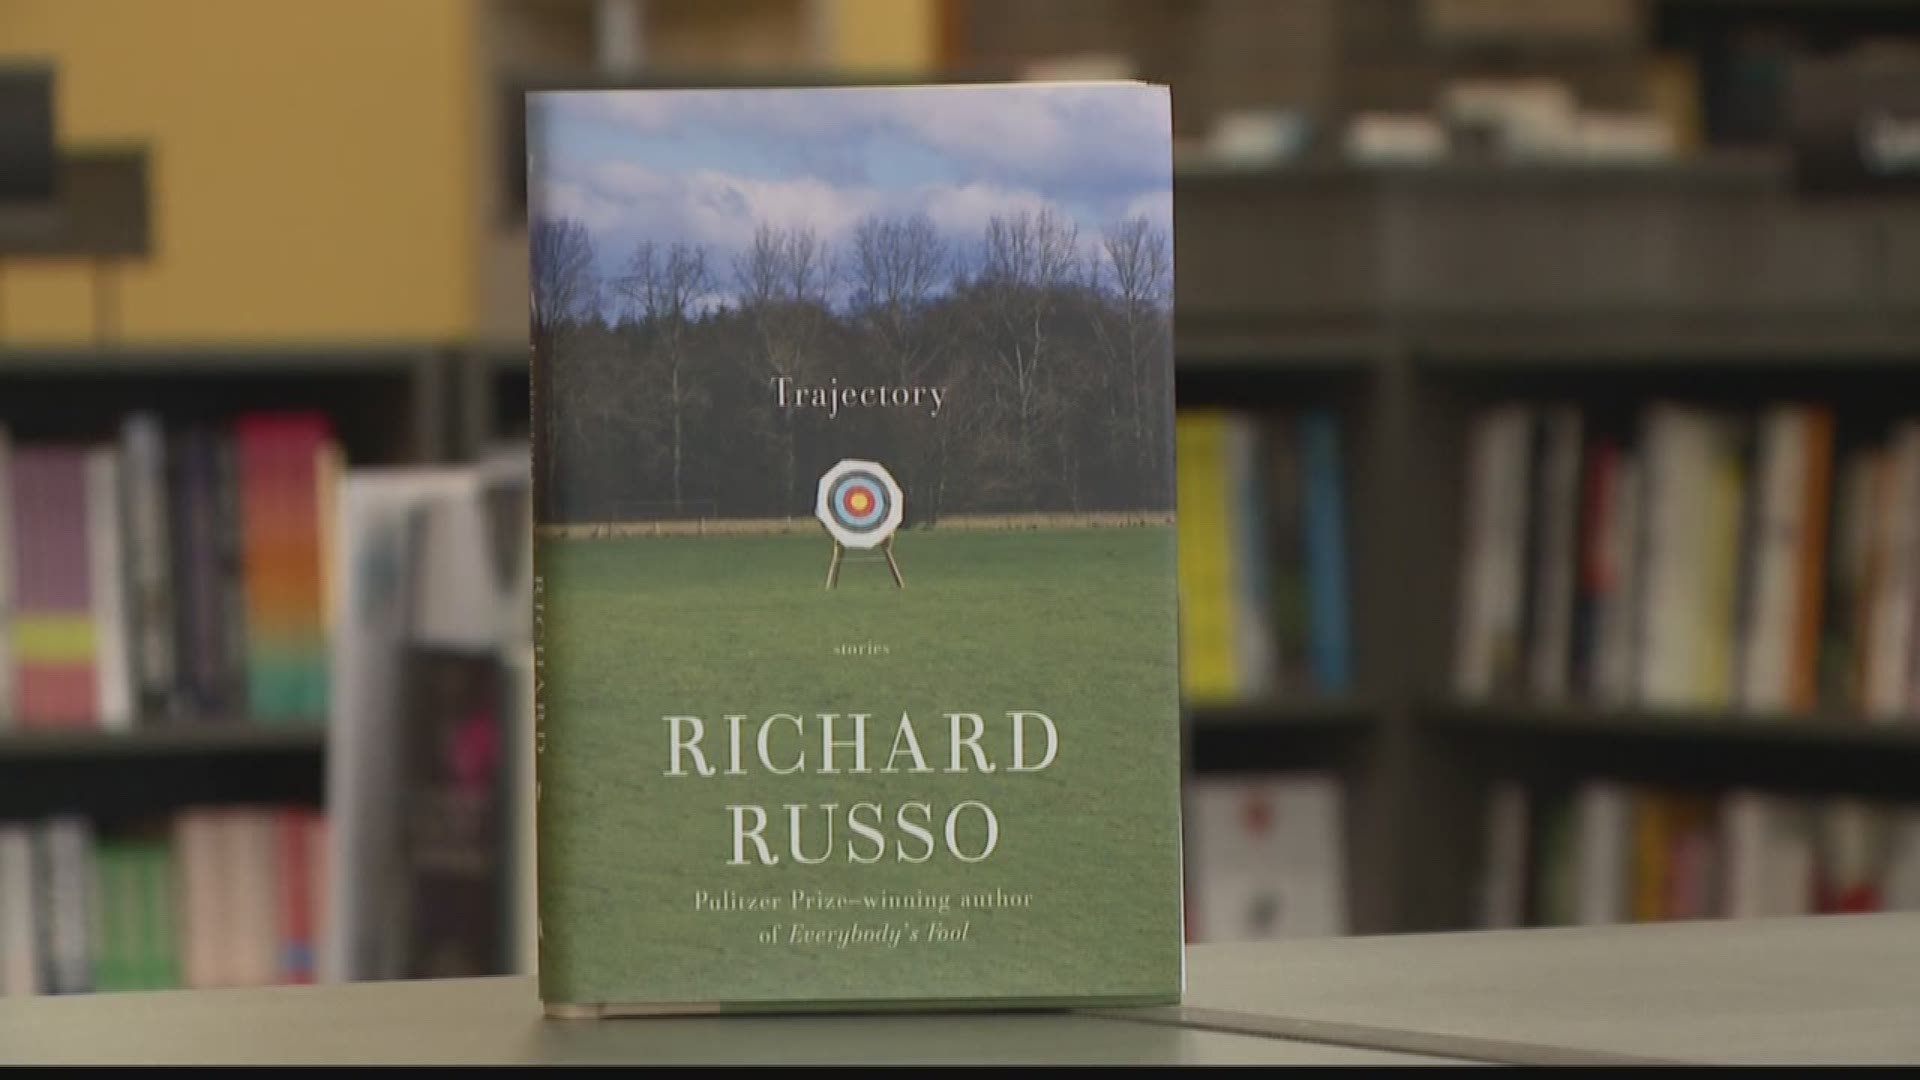 Richard Russo discusses his new book "Trajectory"